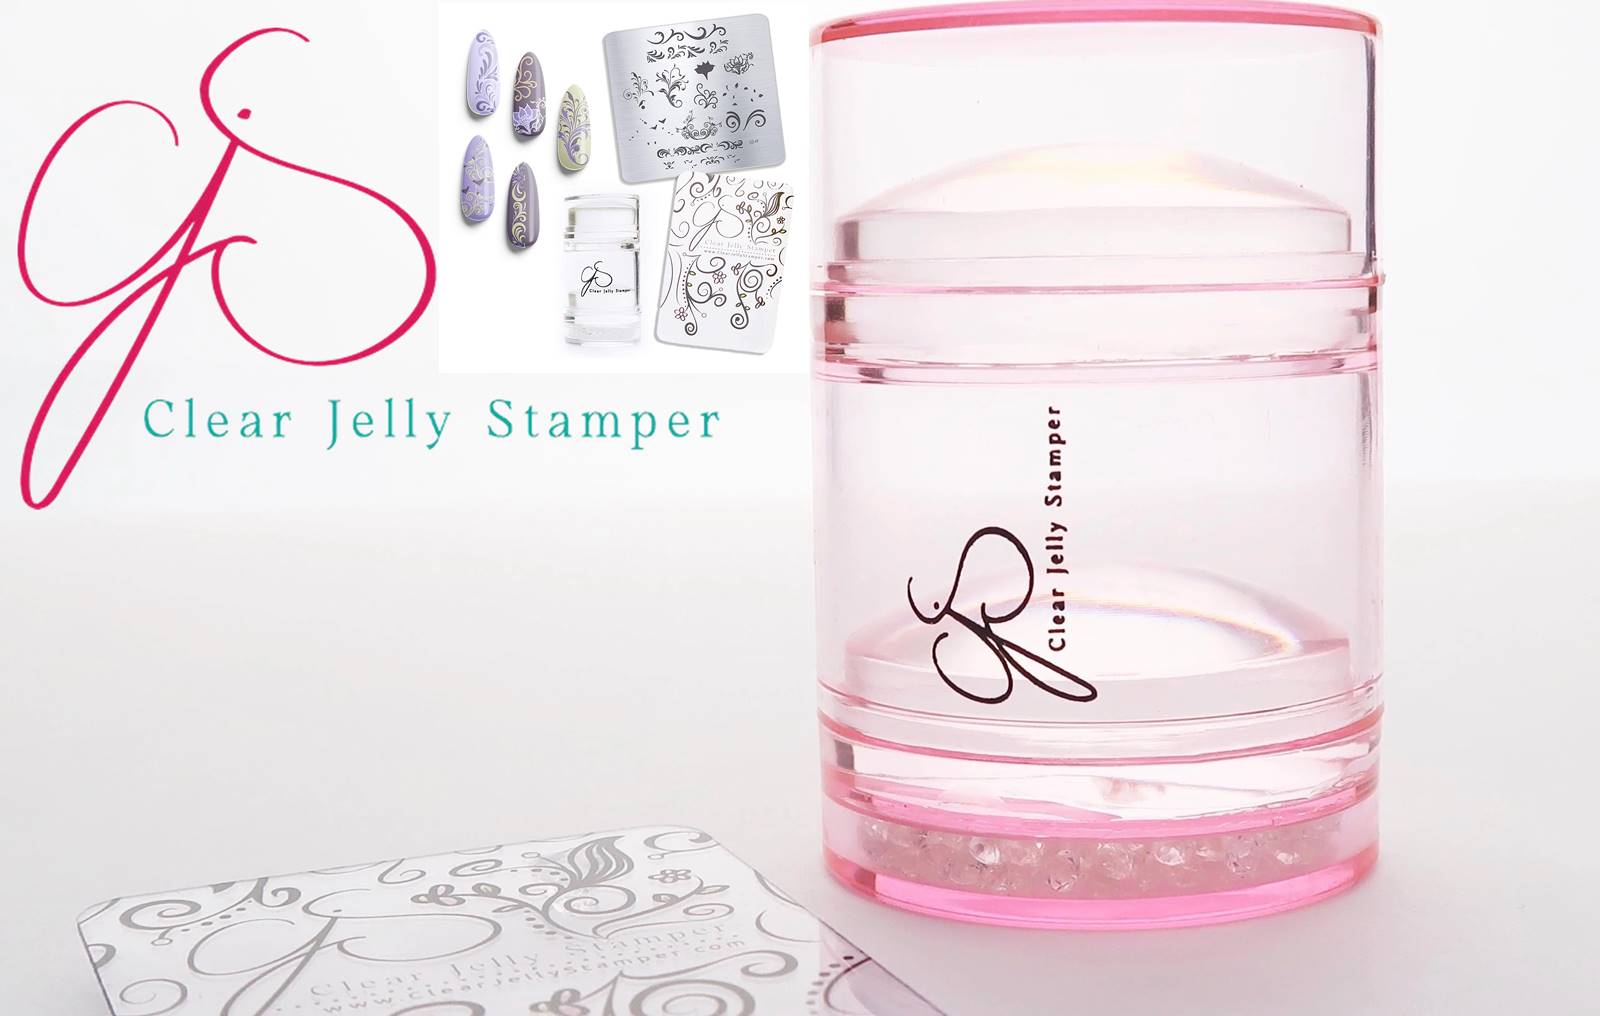 9. Clear Jelly Stamper Nail Art Kit - wide 3